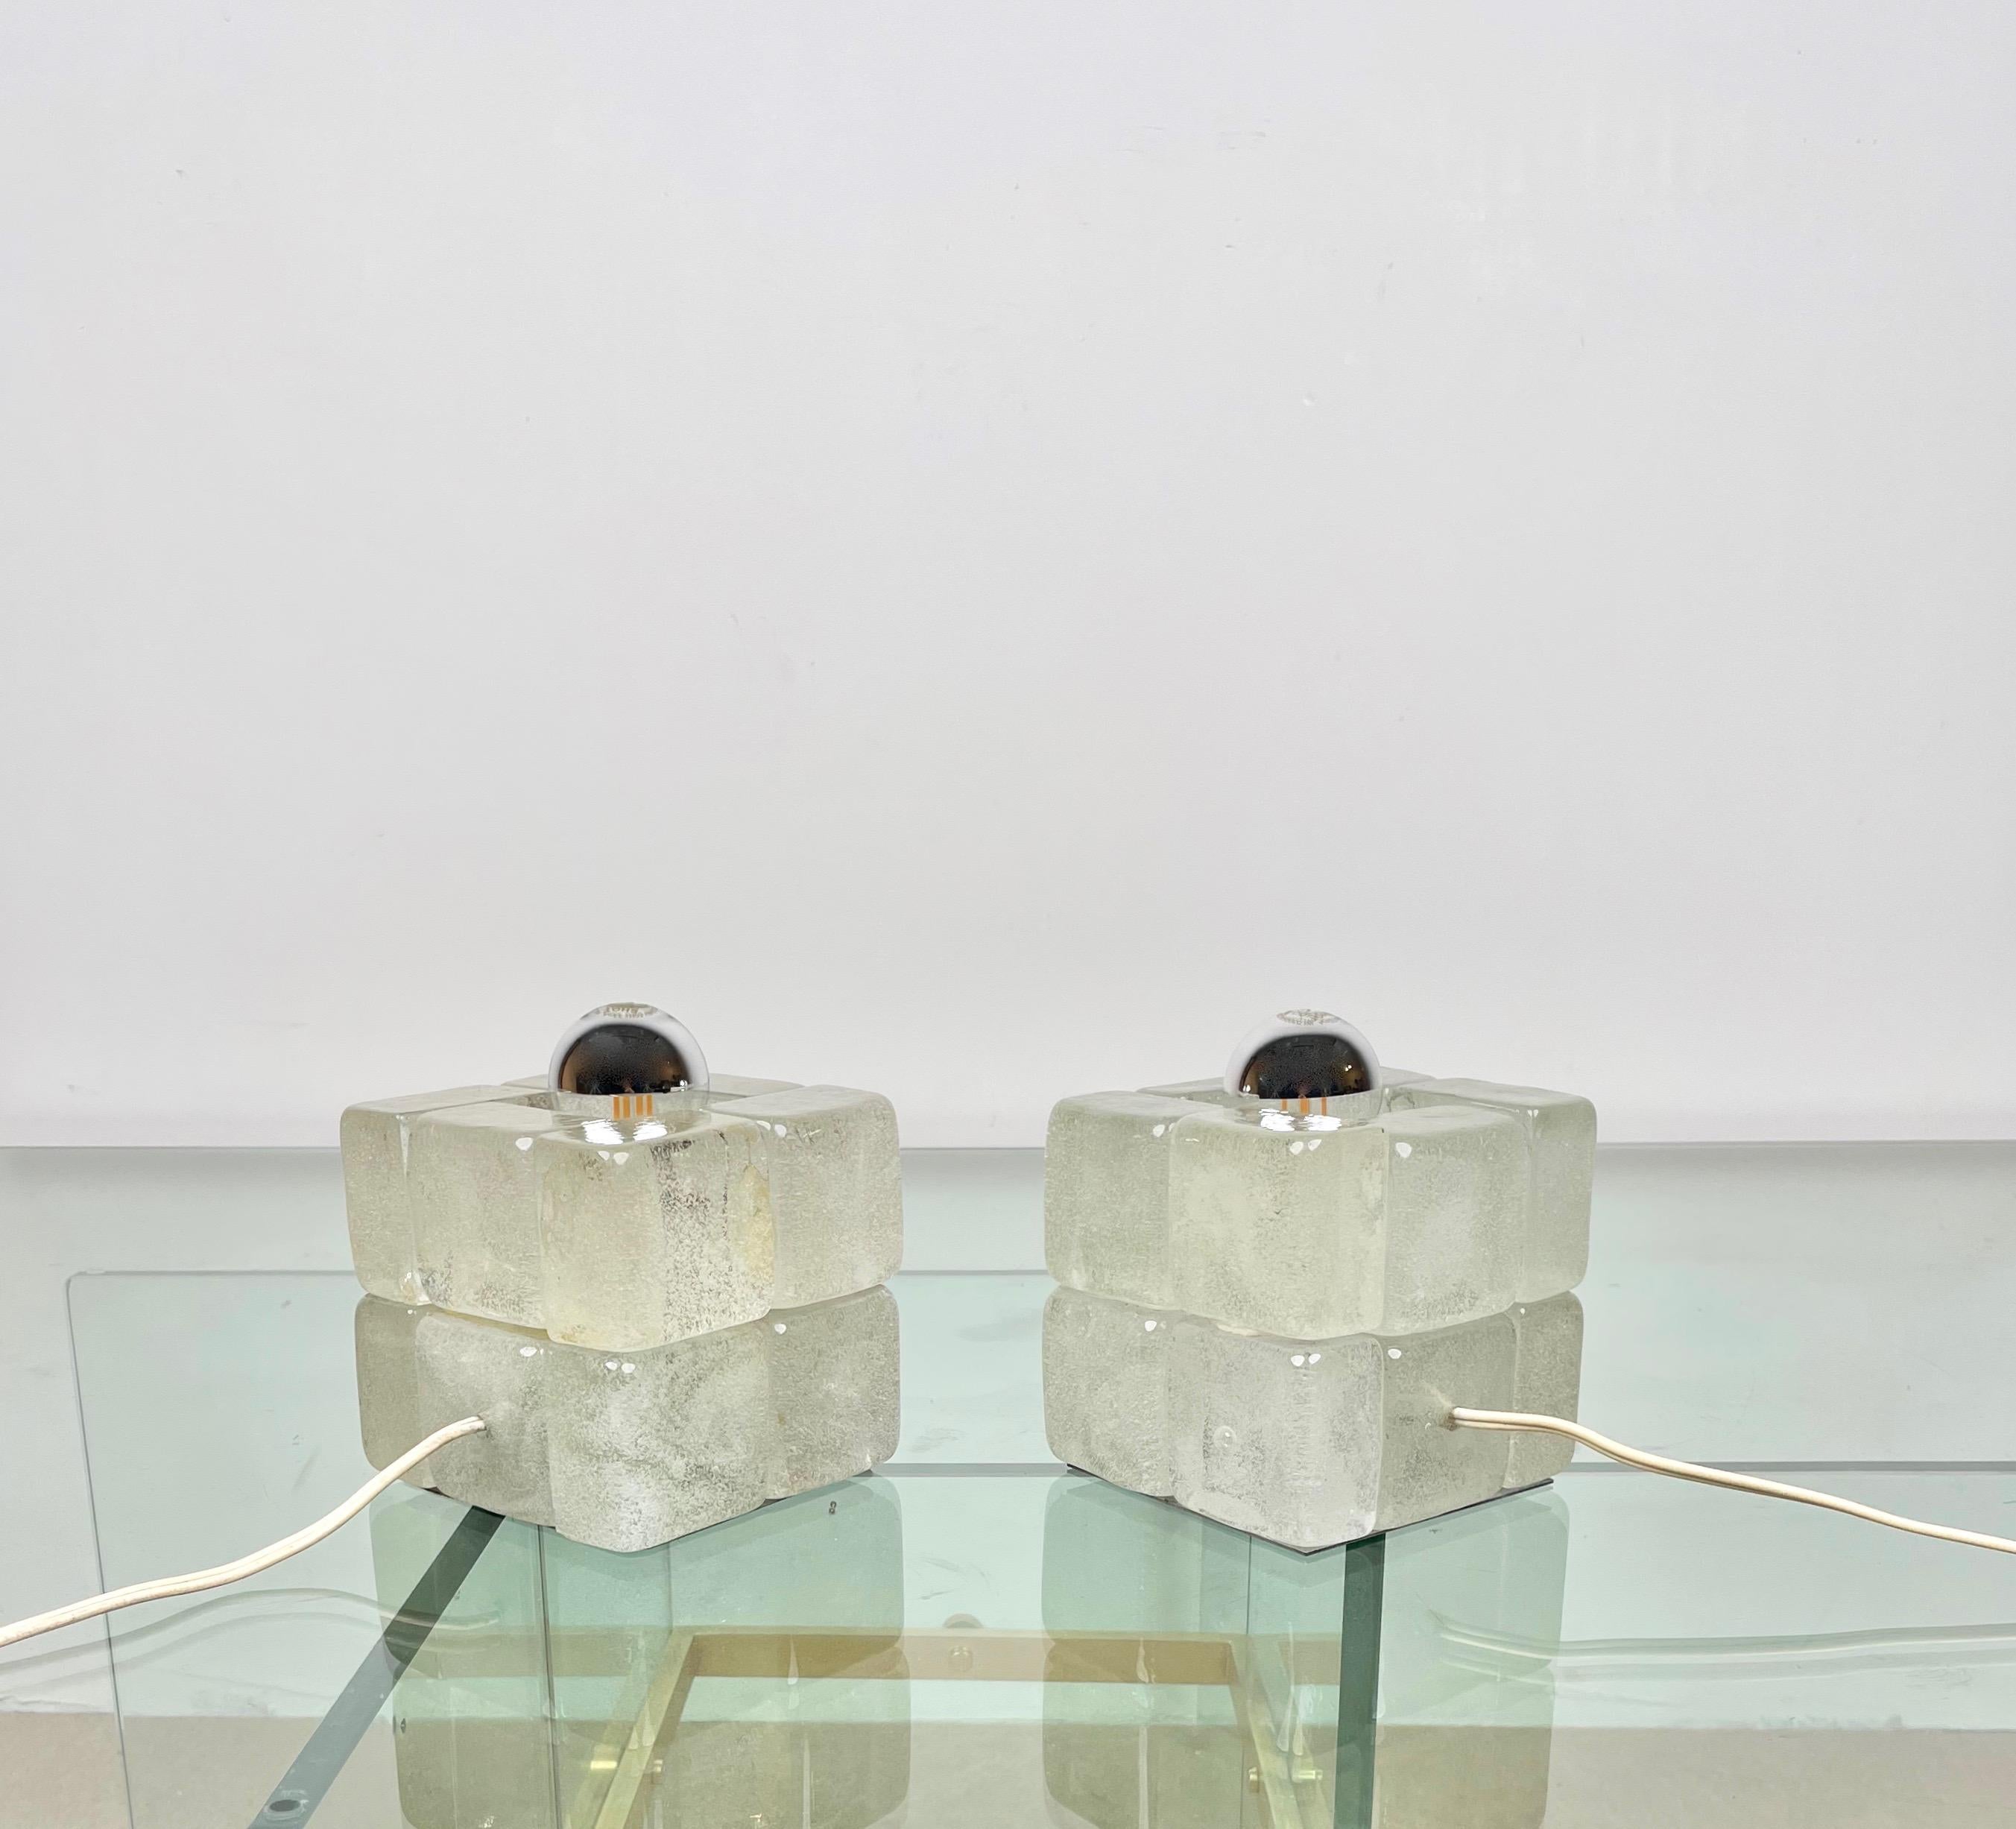 Pair of Murano Glass Cube Lamps by Albano Poli for Poliarte, Italy, 1970s For Sale 9